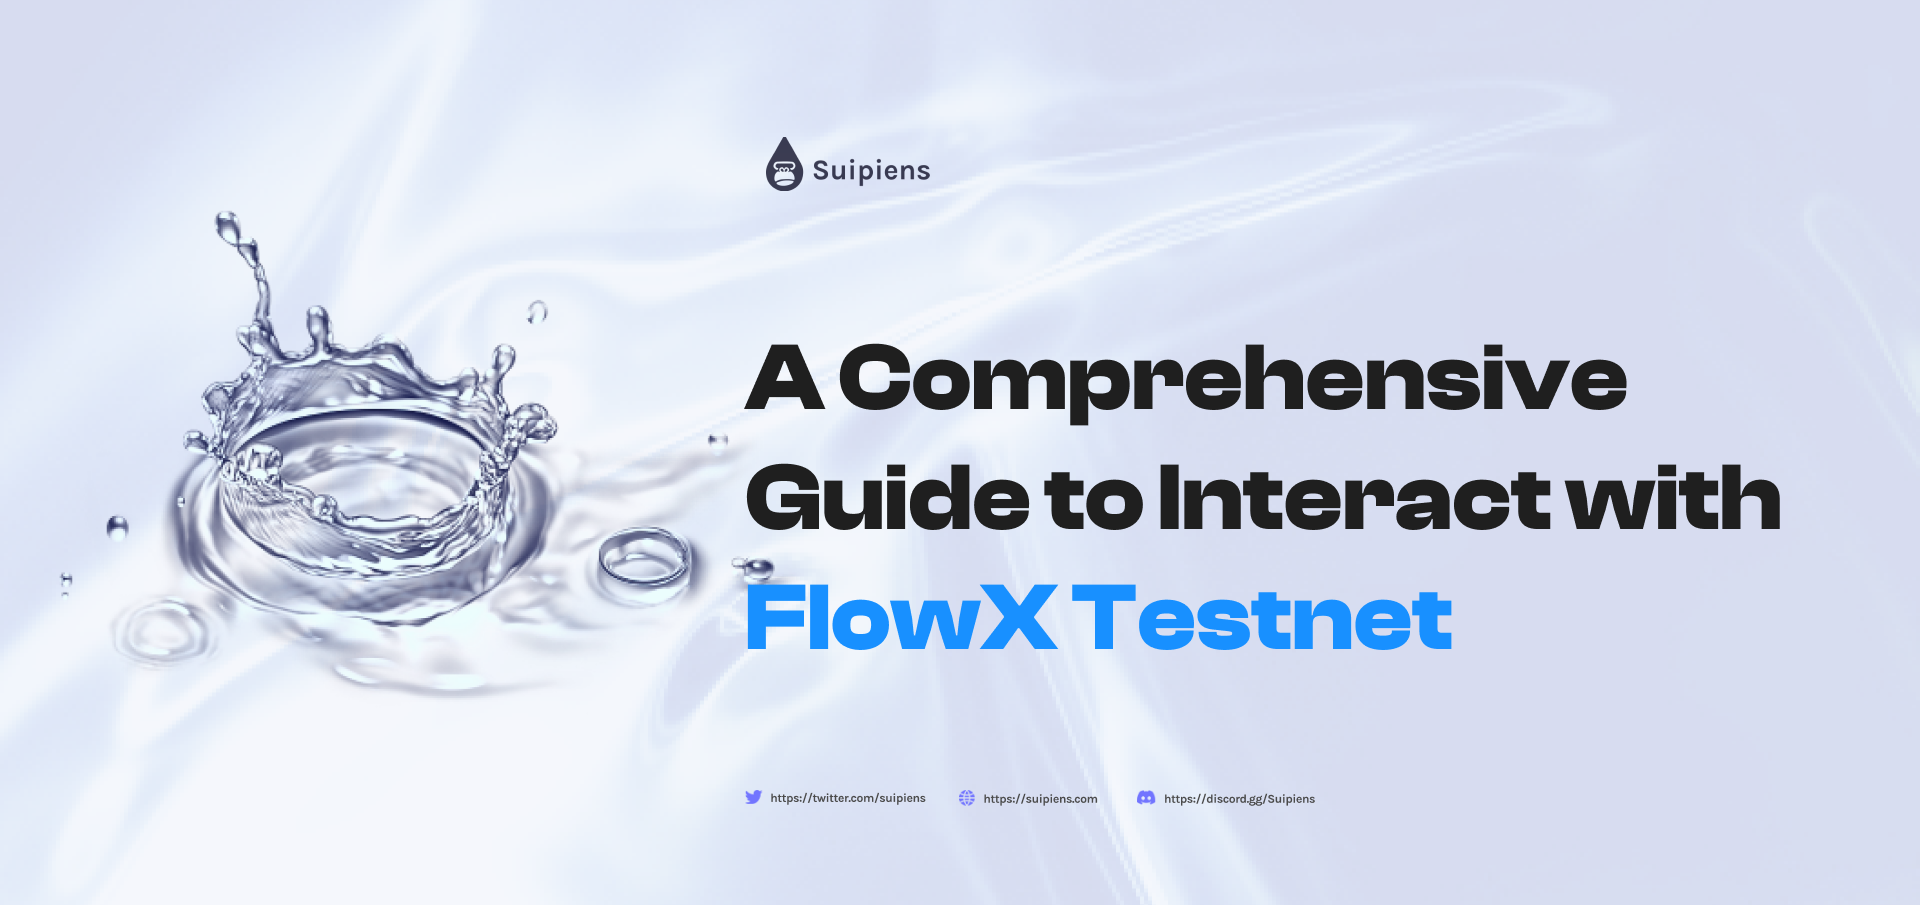 A Comprehensive Guide to Interact with FlowX Testnet